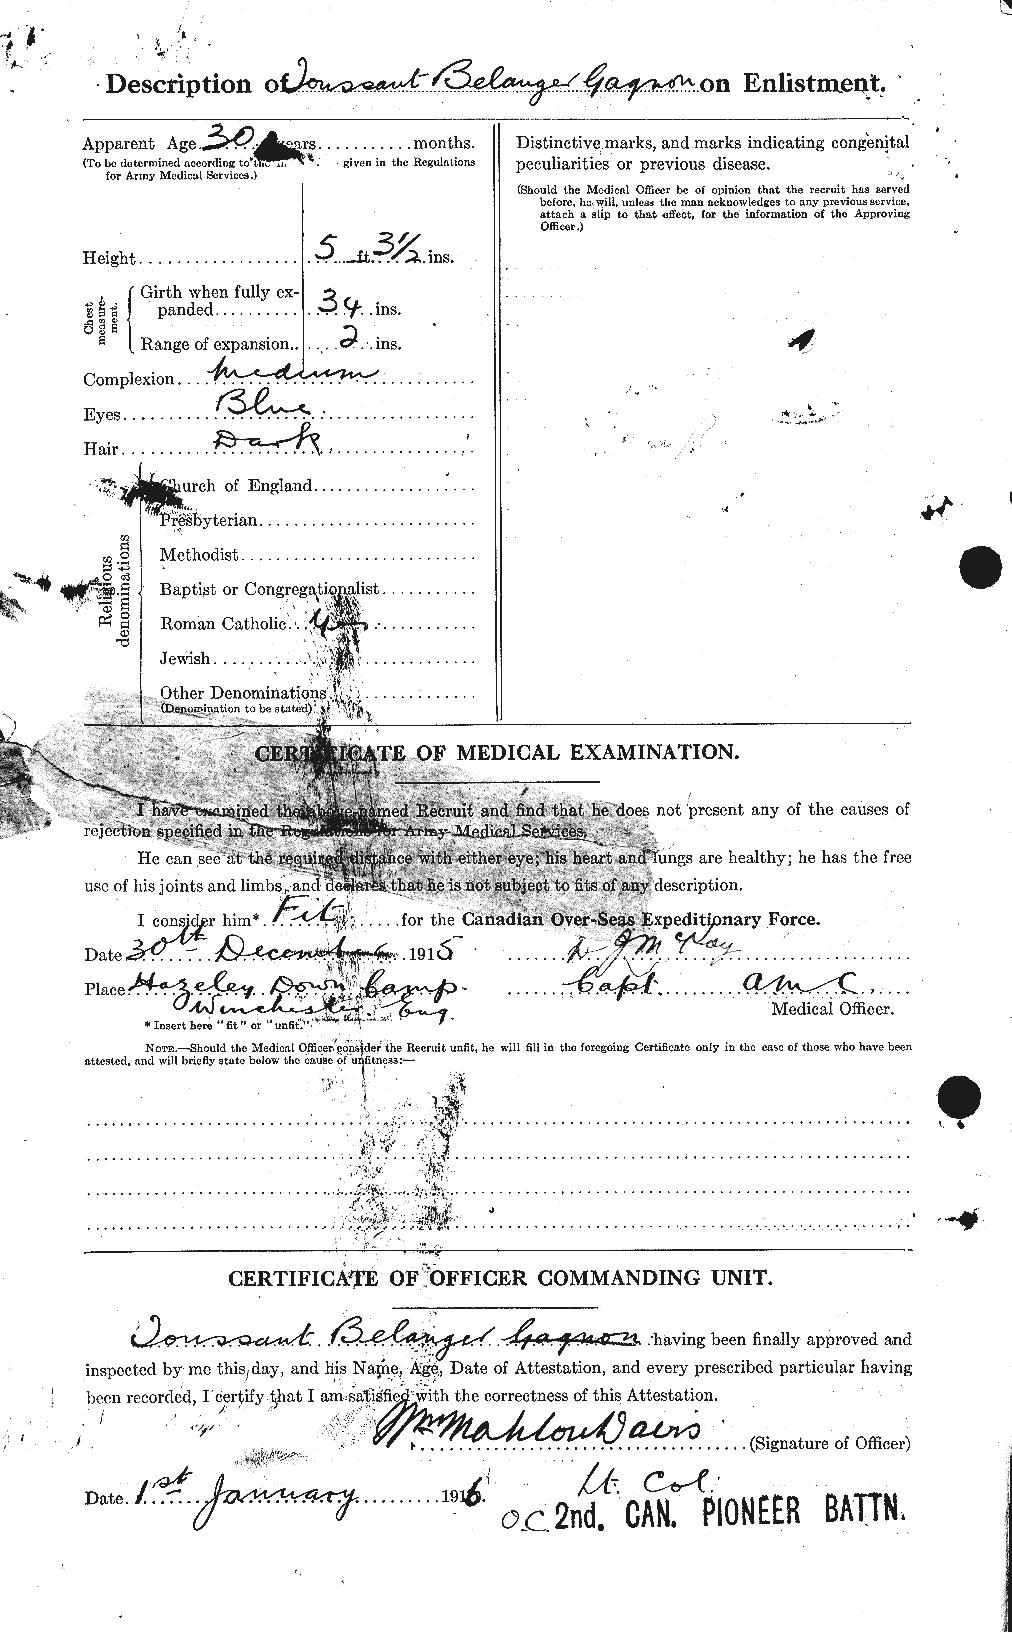 Personnel Records of the First World War - CEF 232656b